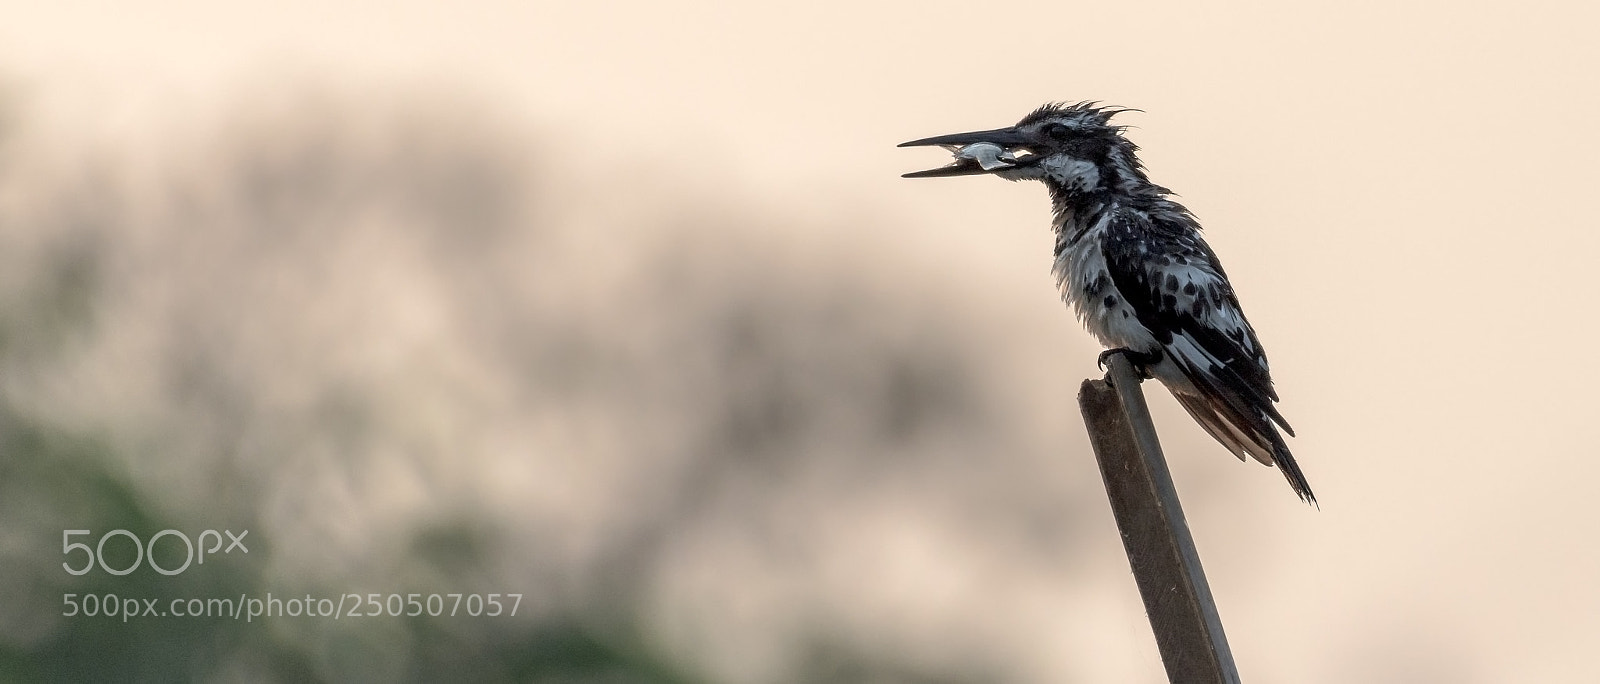 Nikon D810 sample photo. Pied kingfisher with morning photography